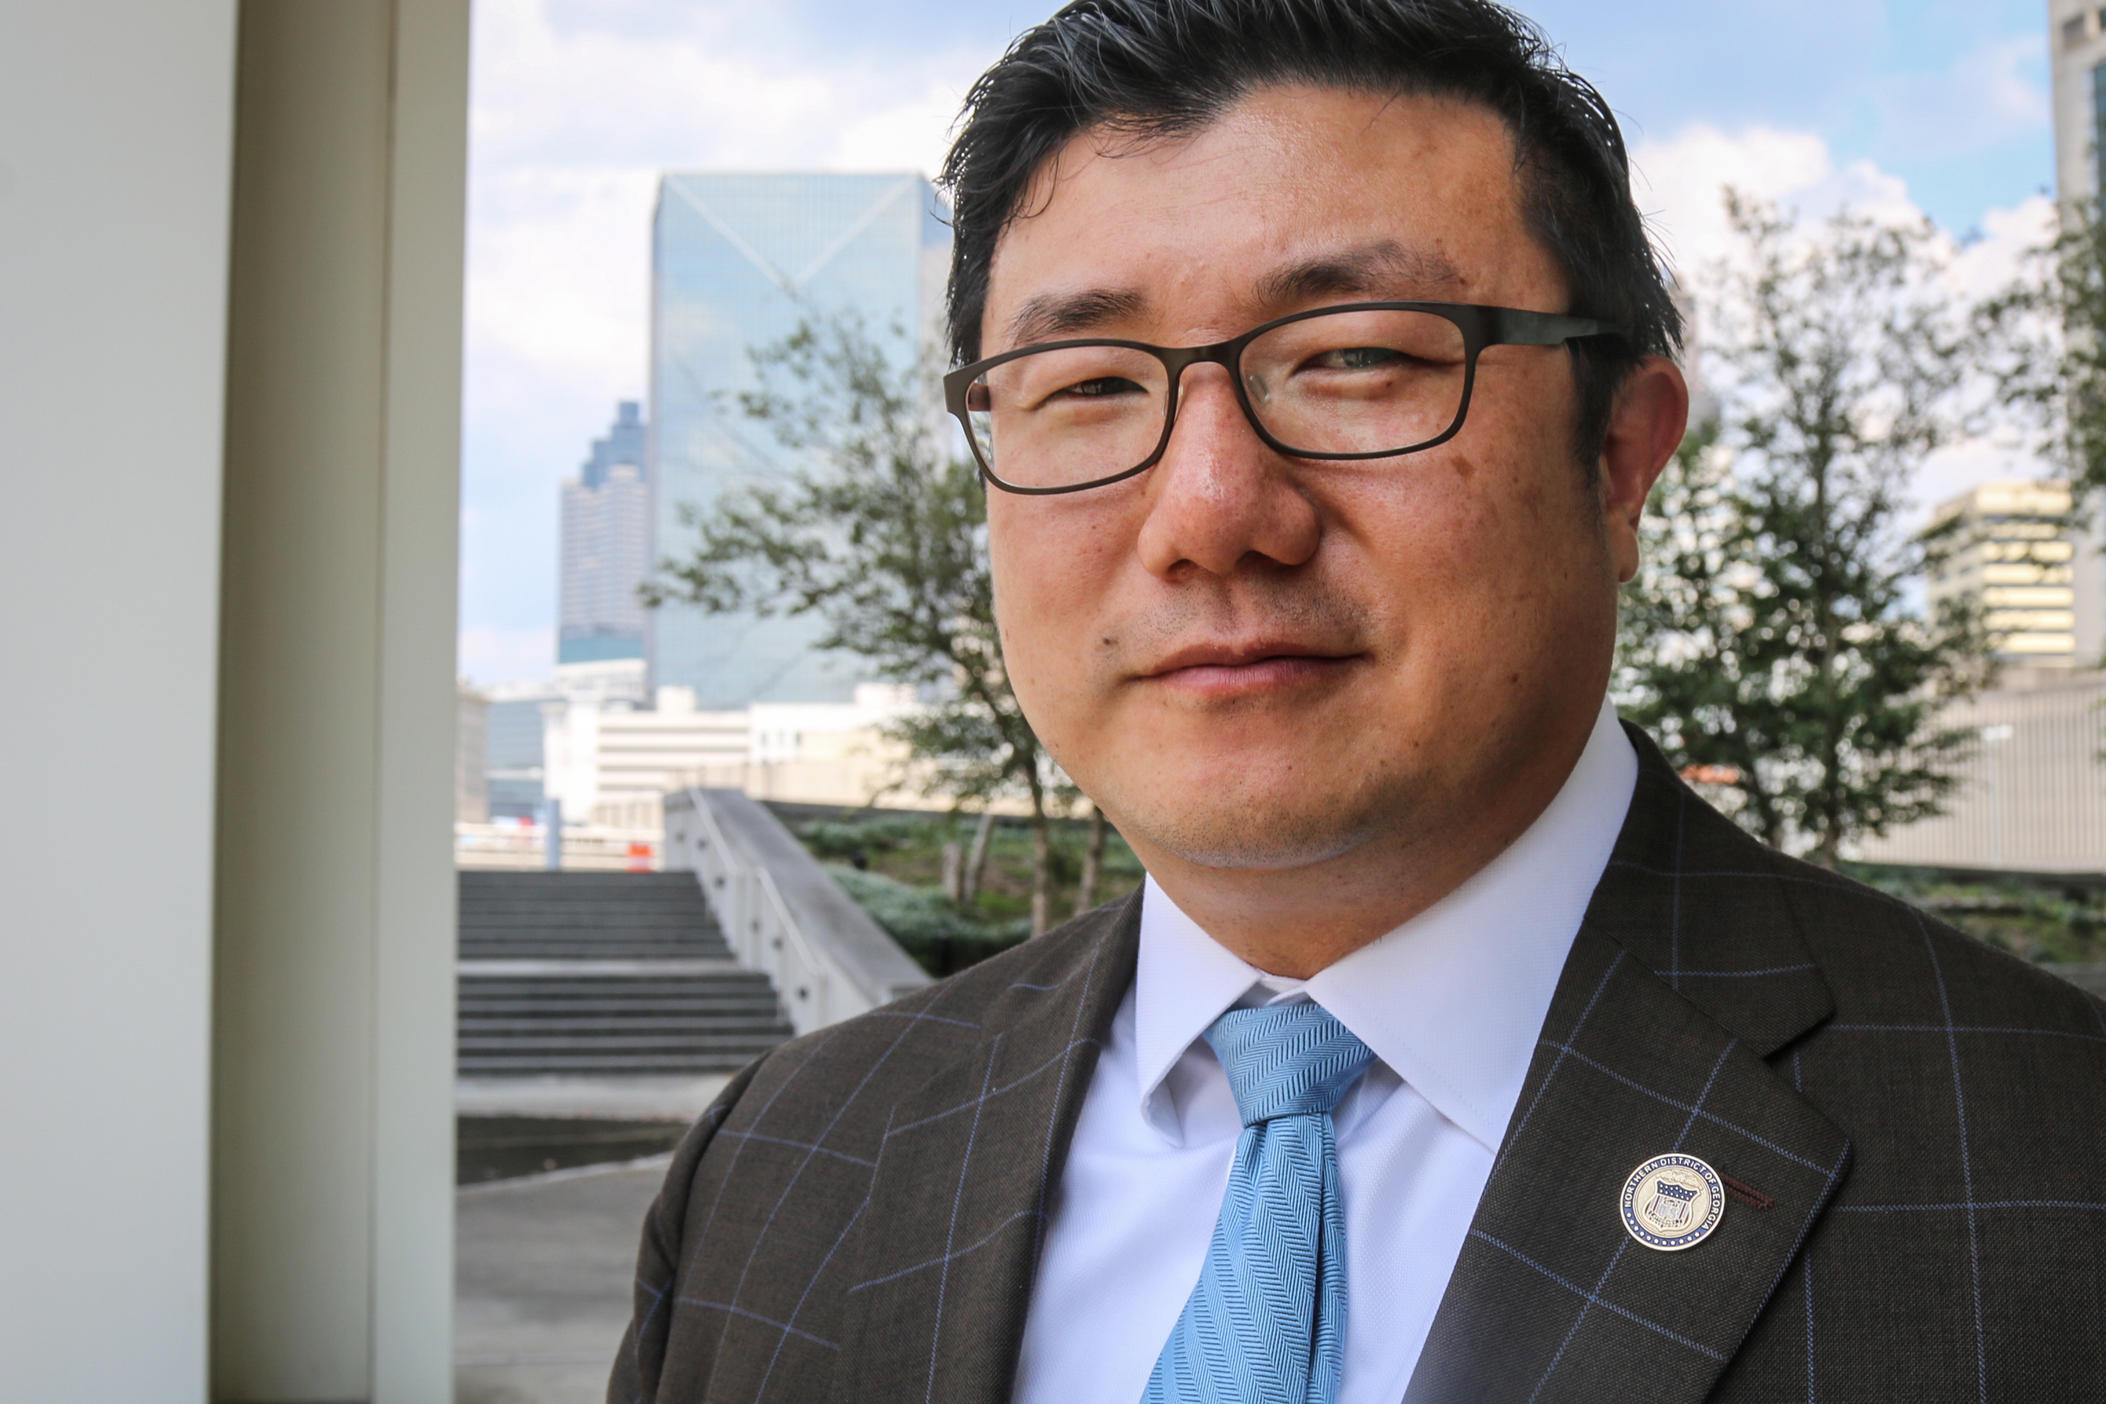 U.S. Attorney Byung J. "BJay" Pak's resignation comes just days after a phone call between Trump and Georgia Secretary of State Brad Raffensperger was made public.